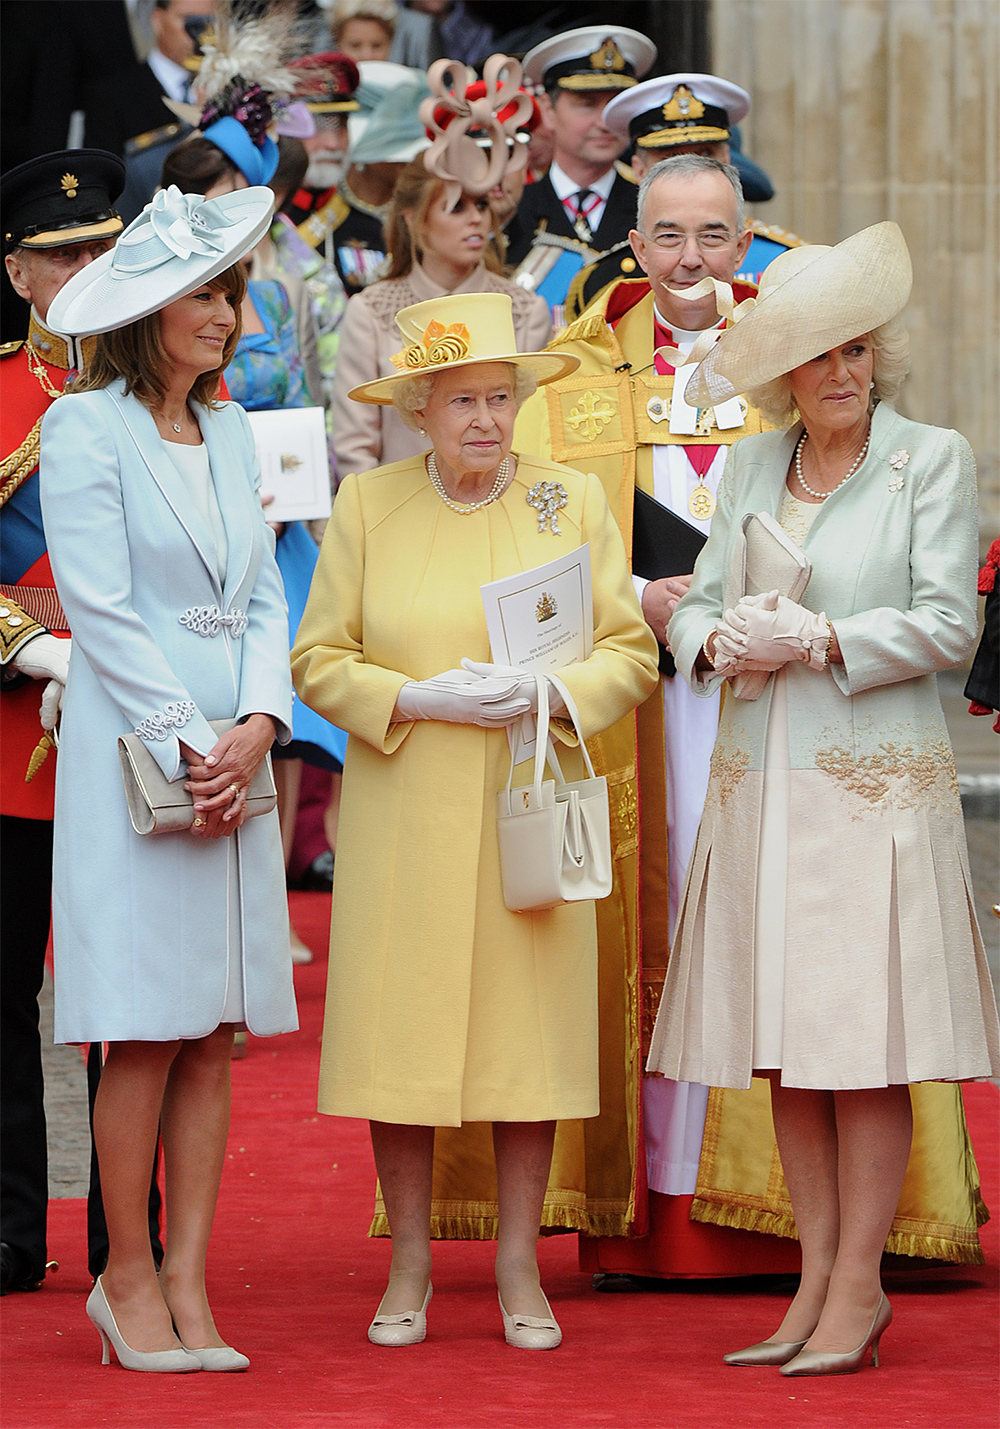 It may have been Prince William and Kate, the Duchess of Cambridge's day - but the Queen made sure her canary yellow coat suit would stand out in the crowd at the Royal Wedding in 2011. Pictured here with the mother of the bride, Carole Middleton, and Camilla, Duchess of Cornwall. Photo / Getty Images